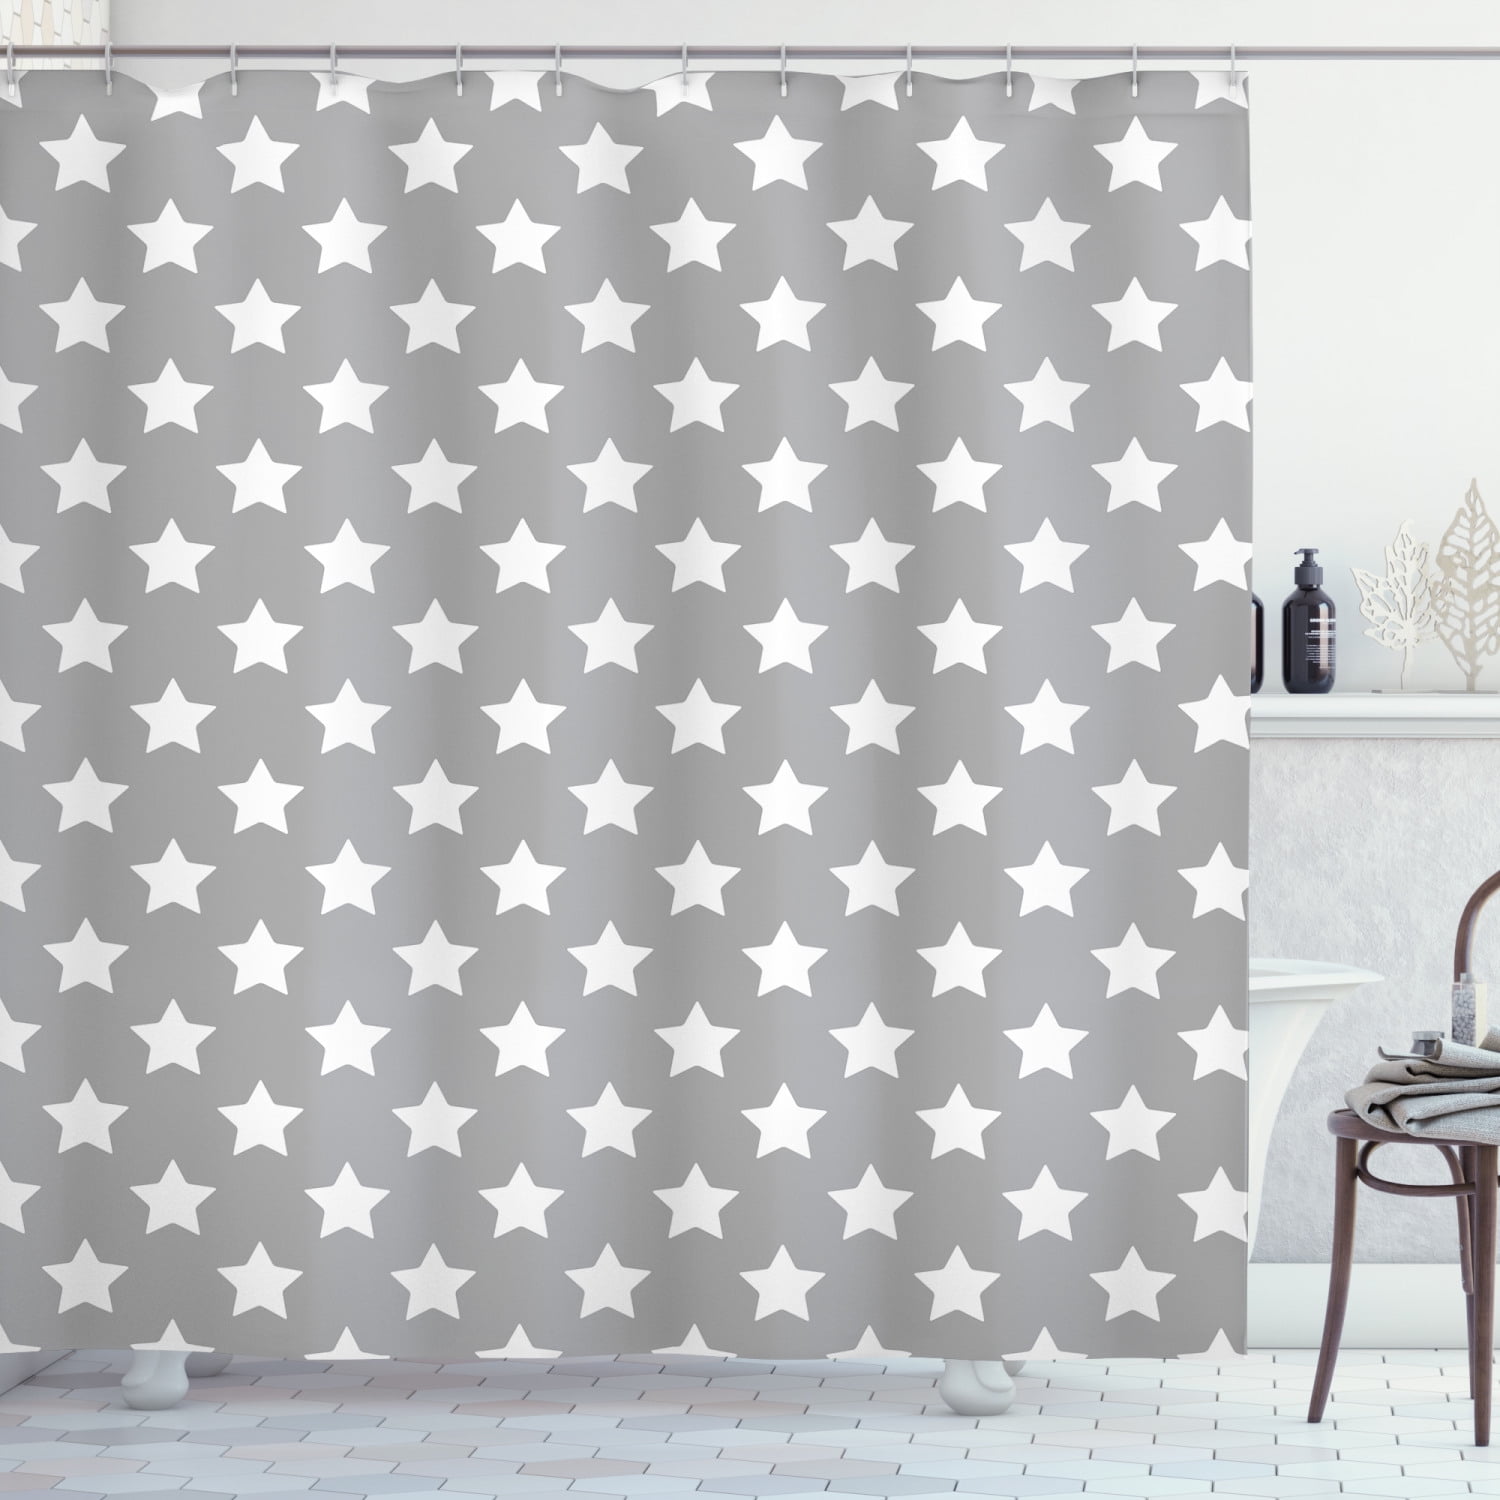 Details about   Space Shower Curtain Dreamy Night with Stars Print for Bathroom 